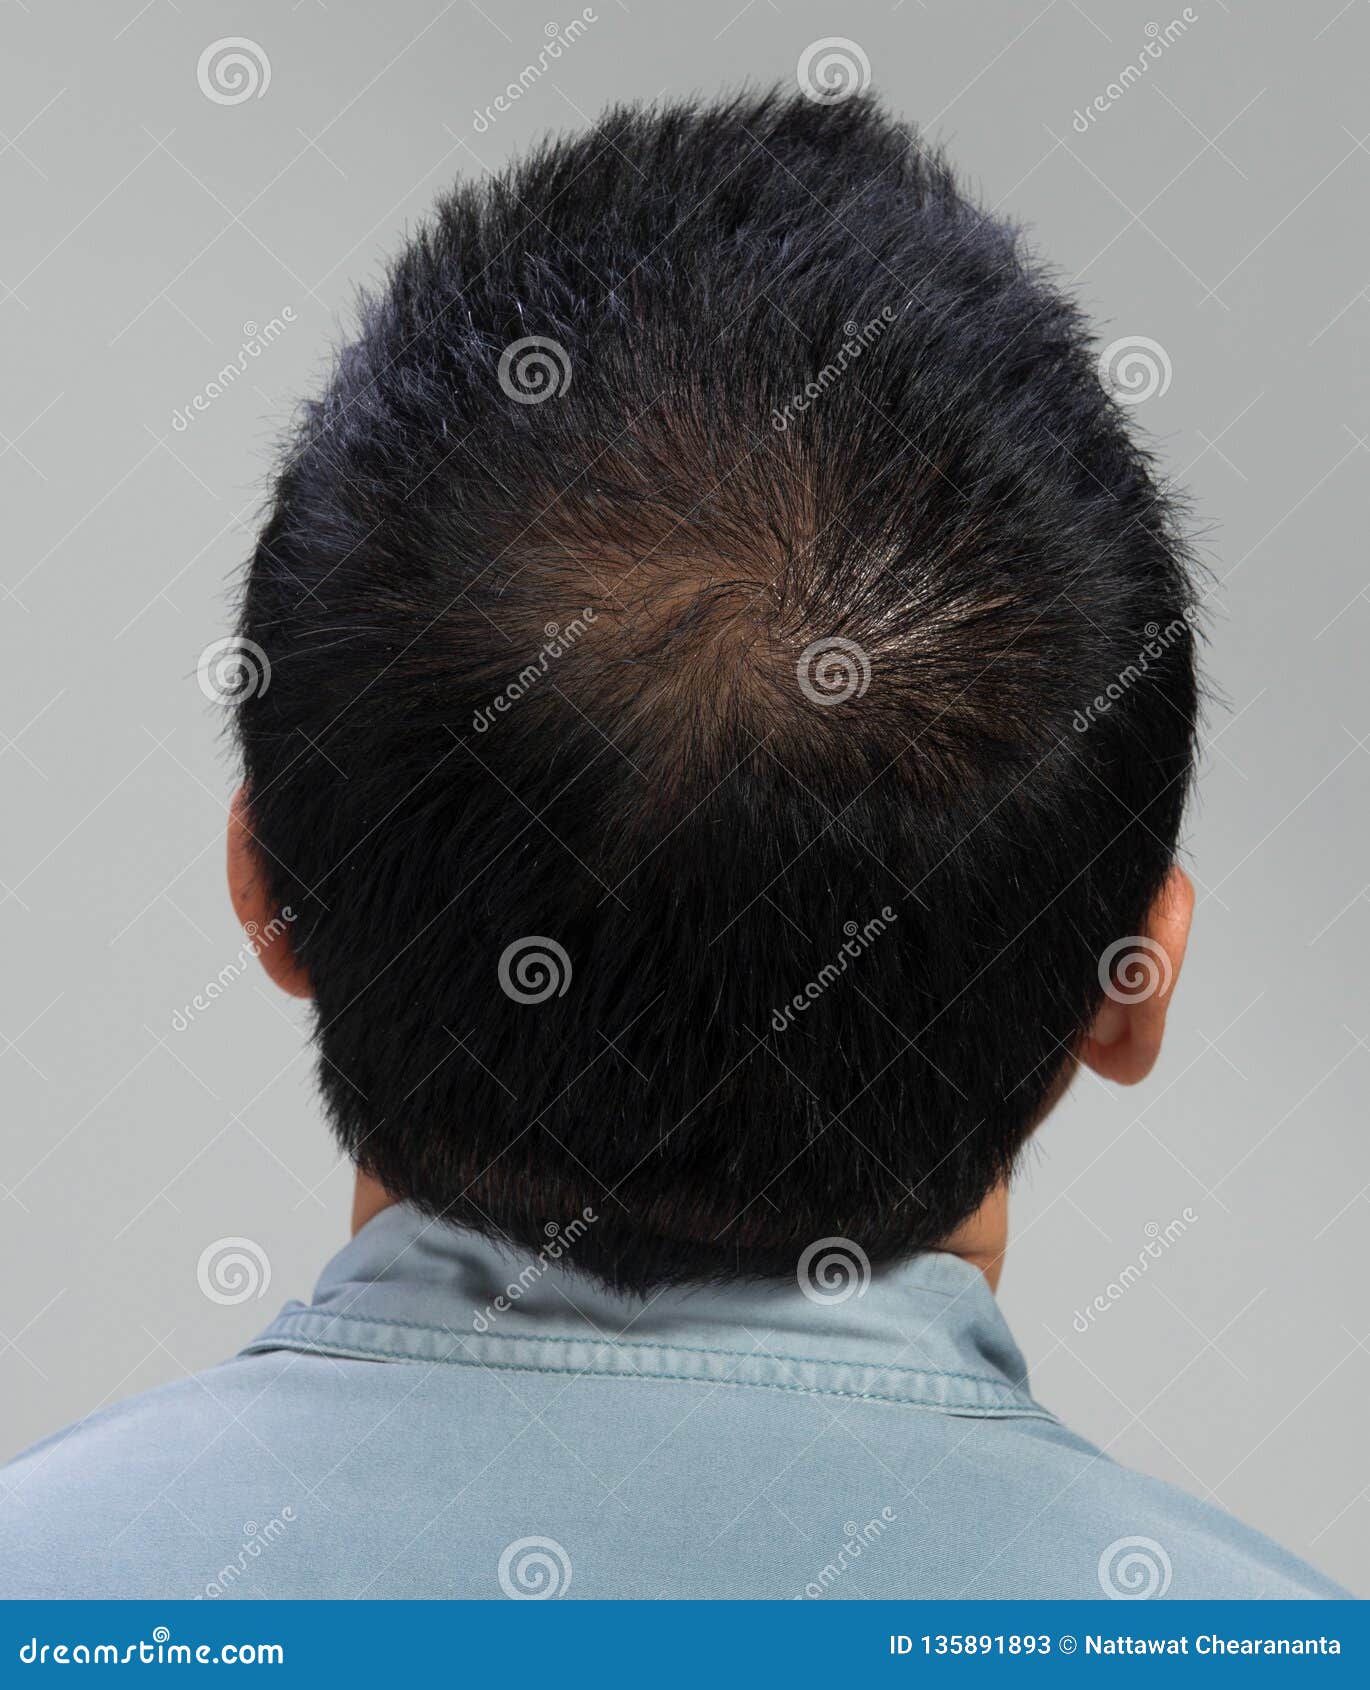 Back View of Male Hair Head Part Bald Stock Image - Image of fall, head:  135891893